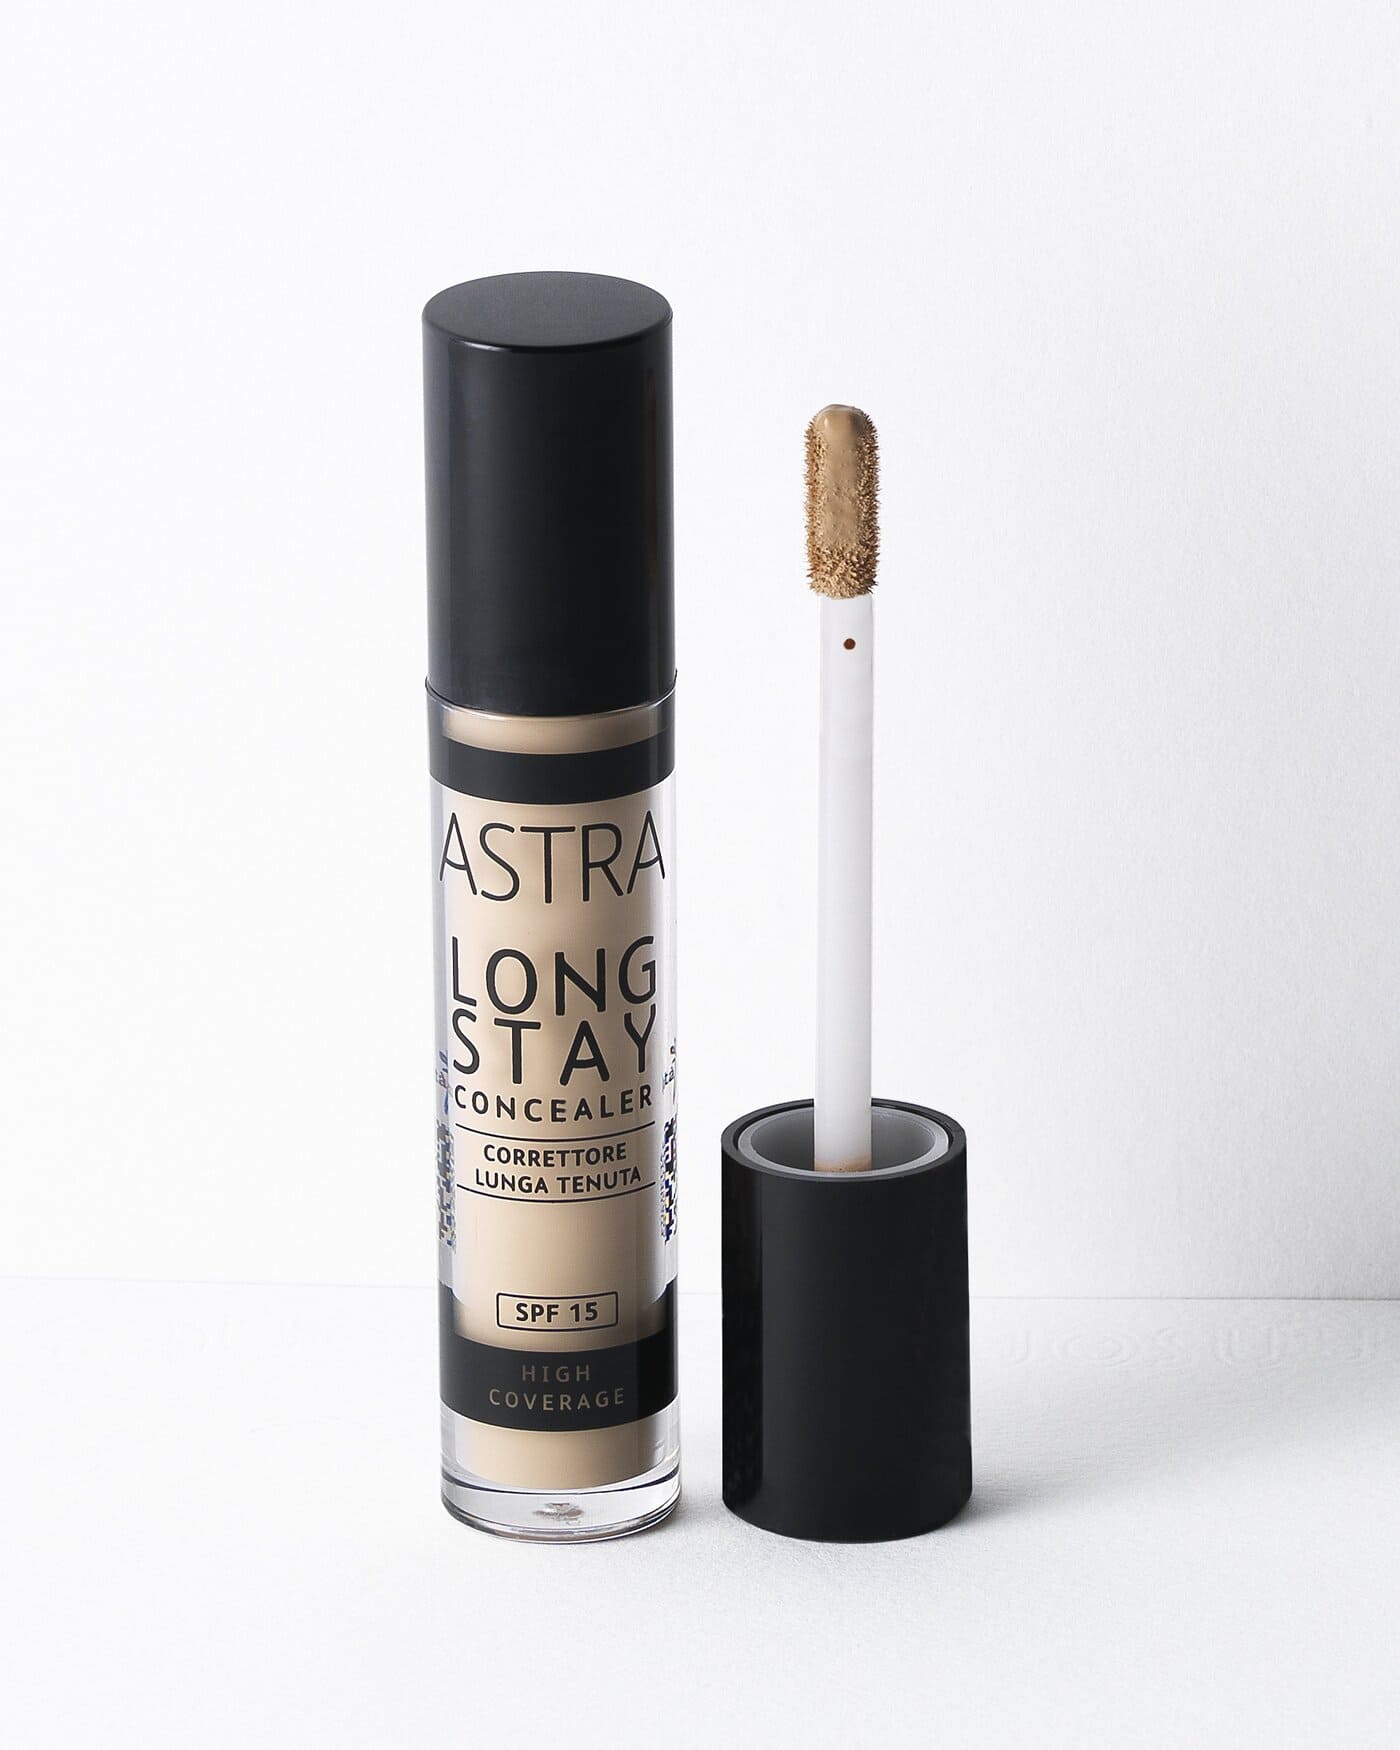 LONG STAY CONCEALER - Correttore Lunga Tenuta - 02N - Nude - Astra Make-Up